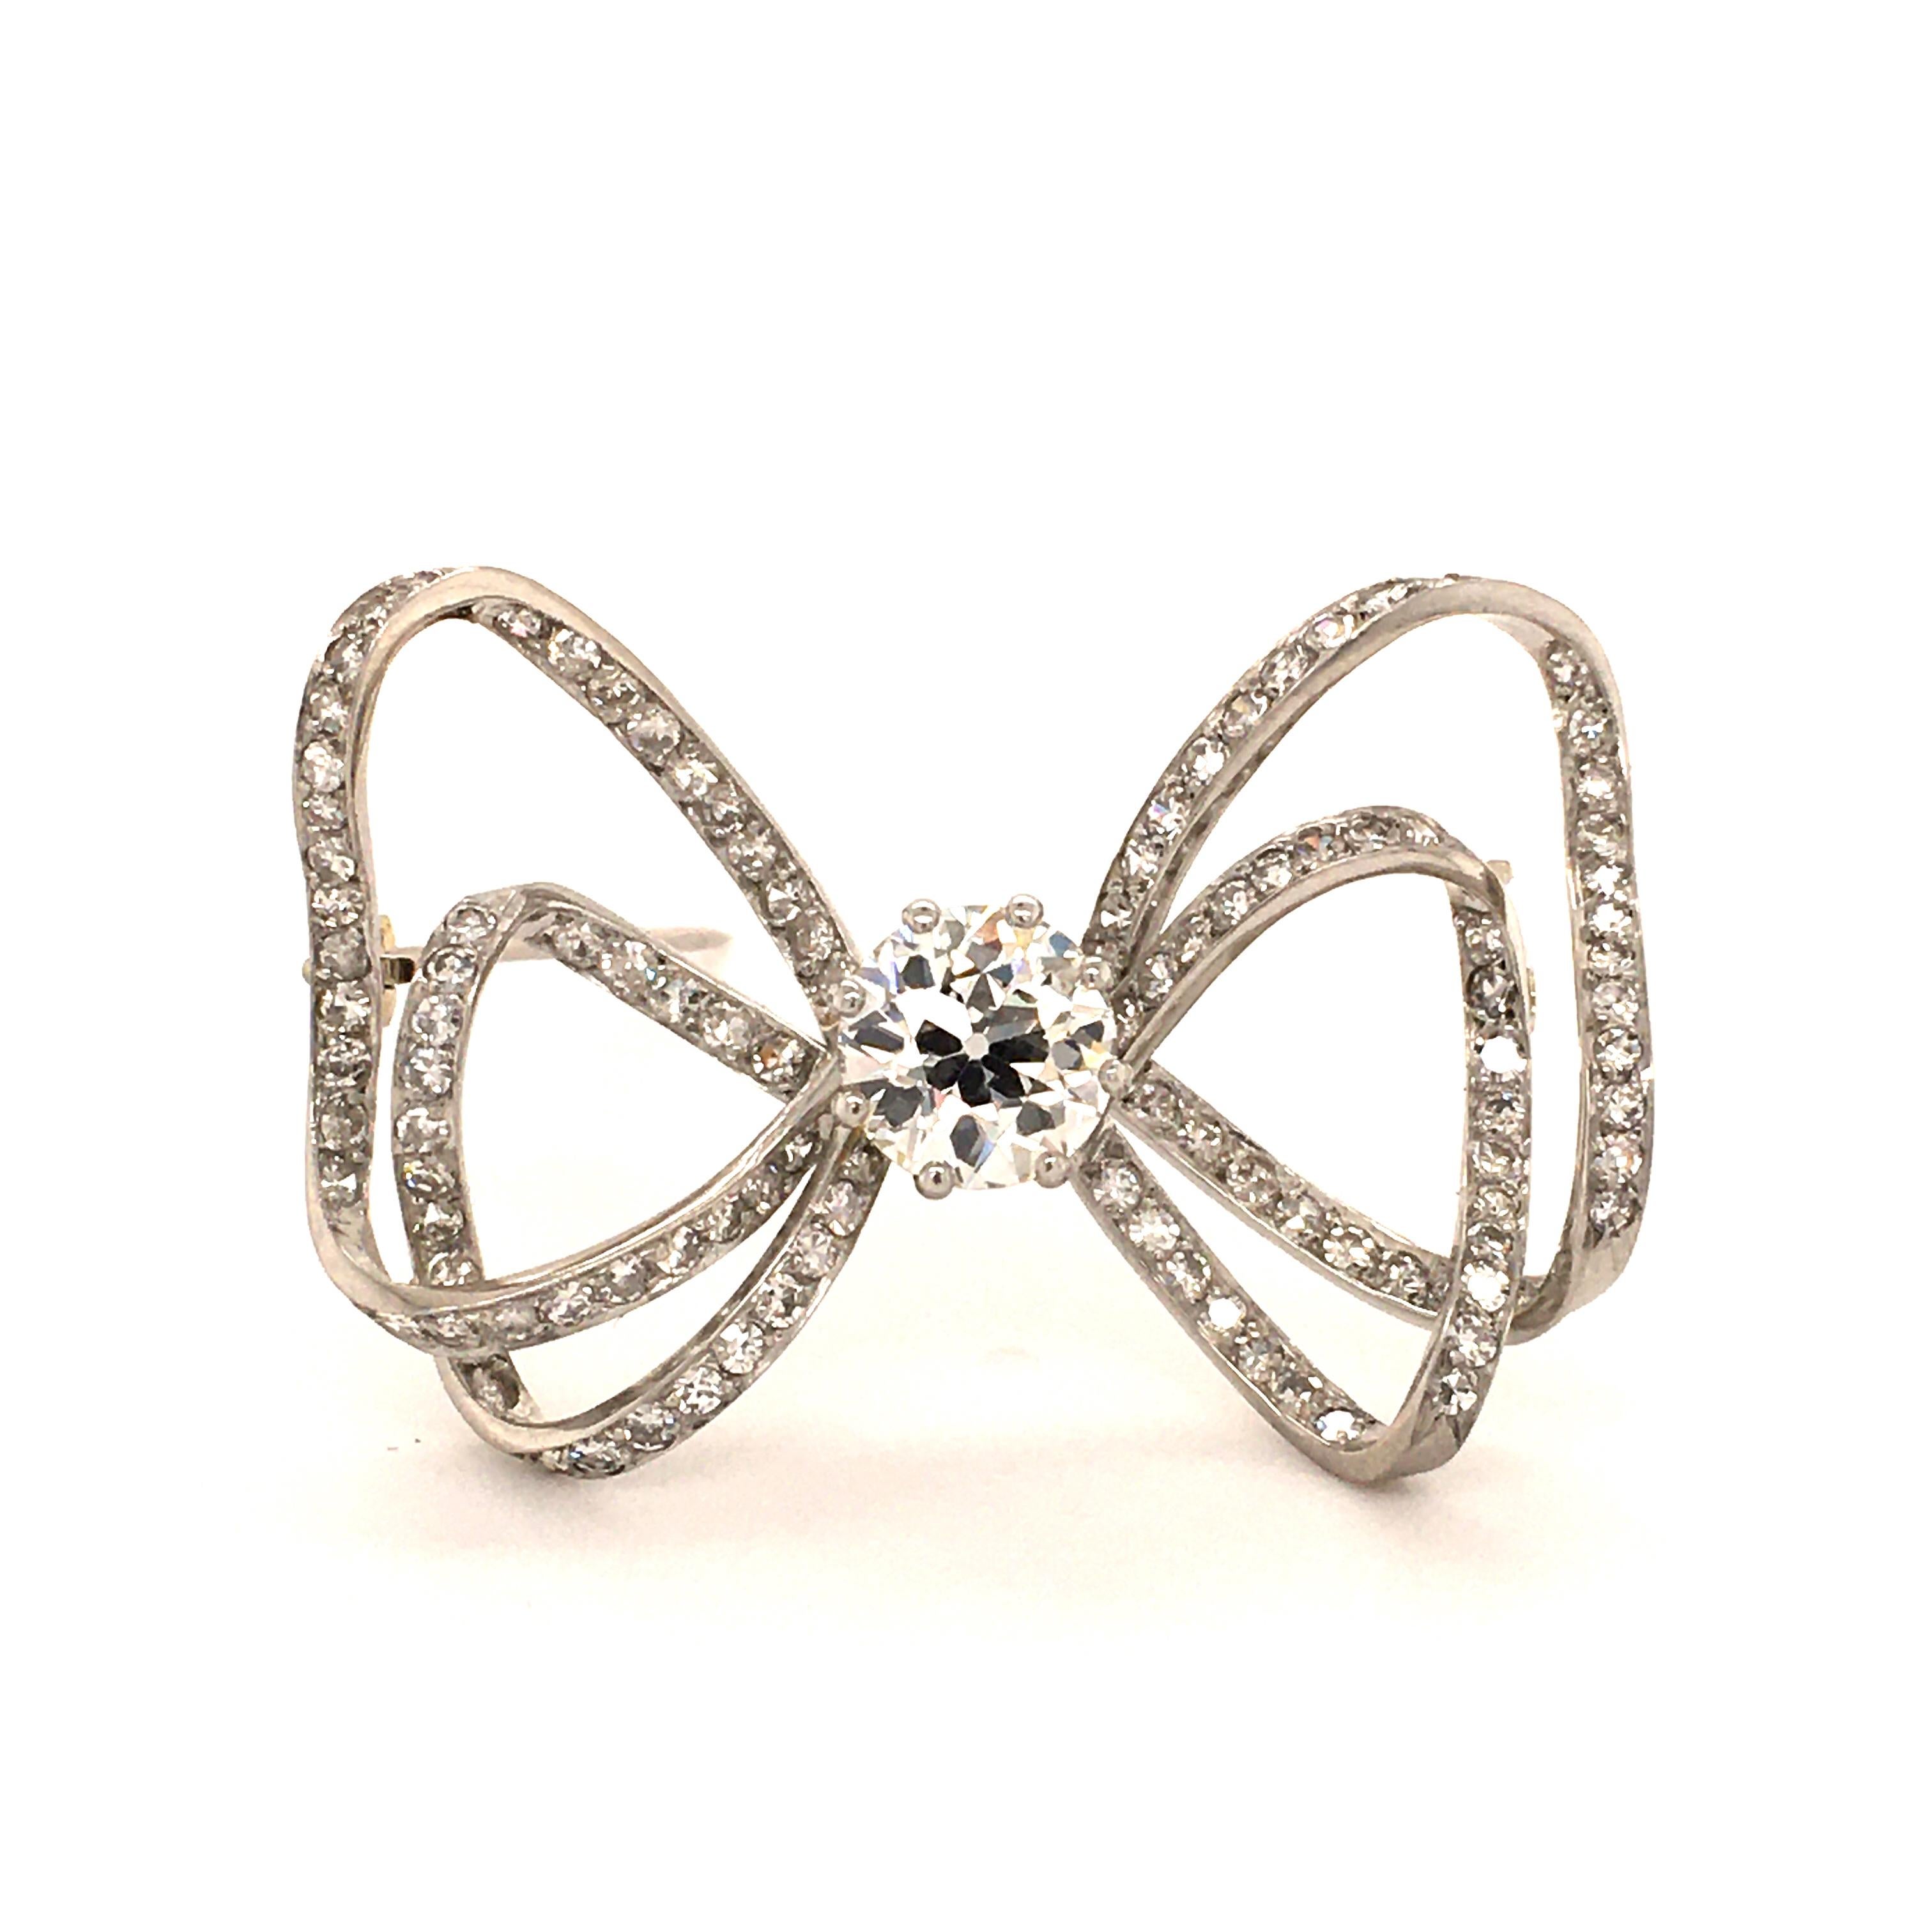 Lovely Ribbon Brooch in White Gold 750. Prong set with one fine old cut Diamond of 2.03 ct and J-si1 quality. Carefully set with 112 single cut Diamonds. Very beautiful item.

In the past, jewelry was always given meaning, if you want to know more,